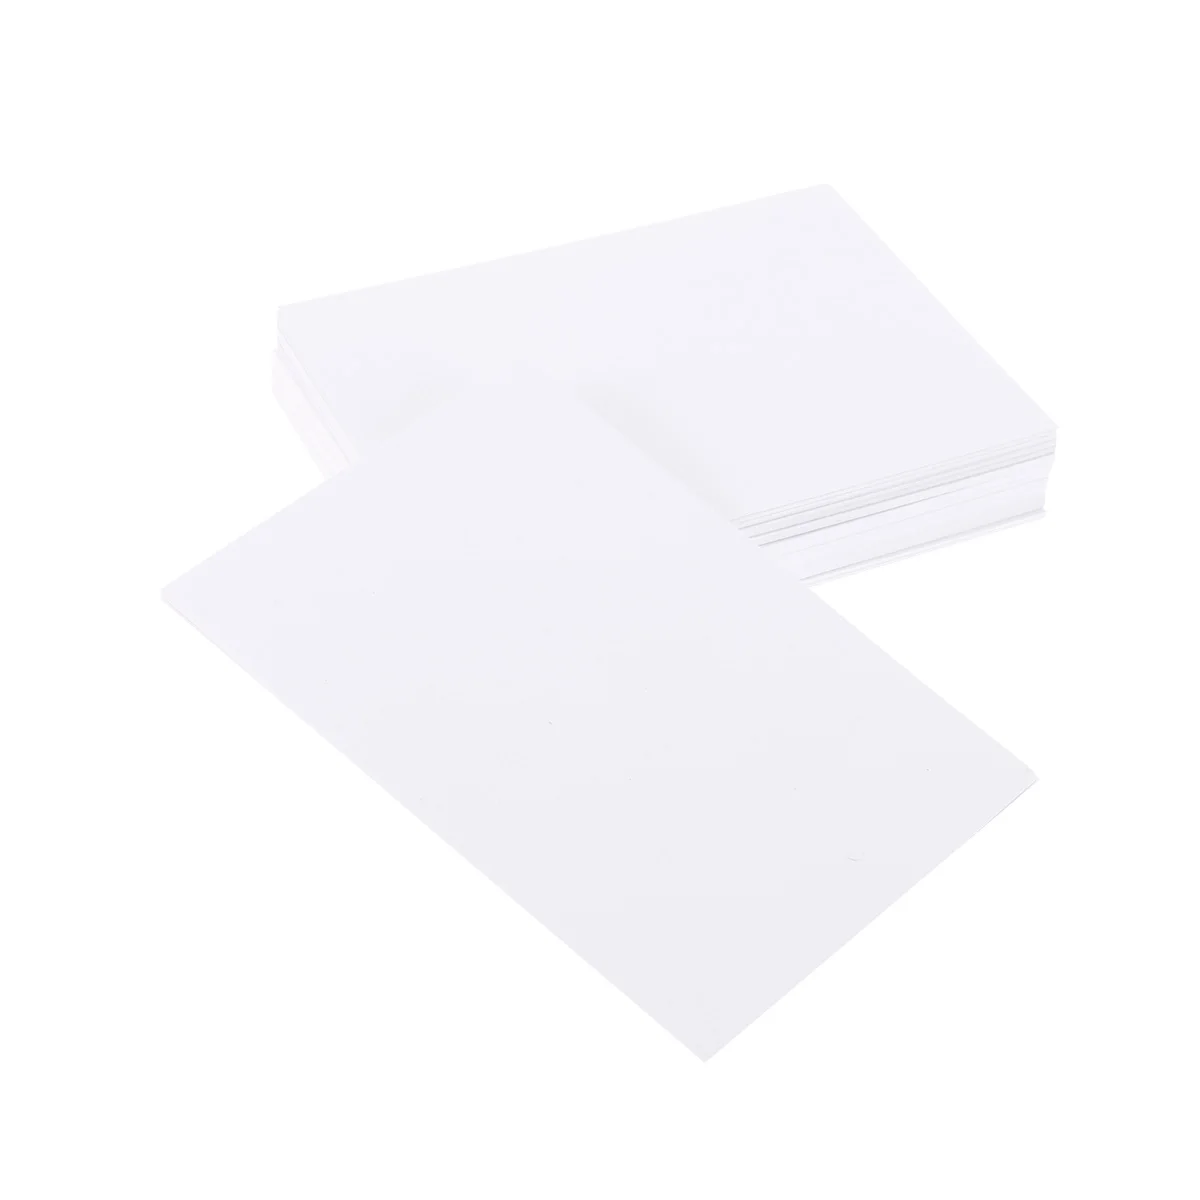 

120 Sheets White Watercolor Paper Drawing Paper A5 Size Scrapbook Crafts Paper Easel Paper for Kids DIY Photo Album